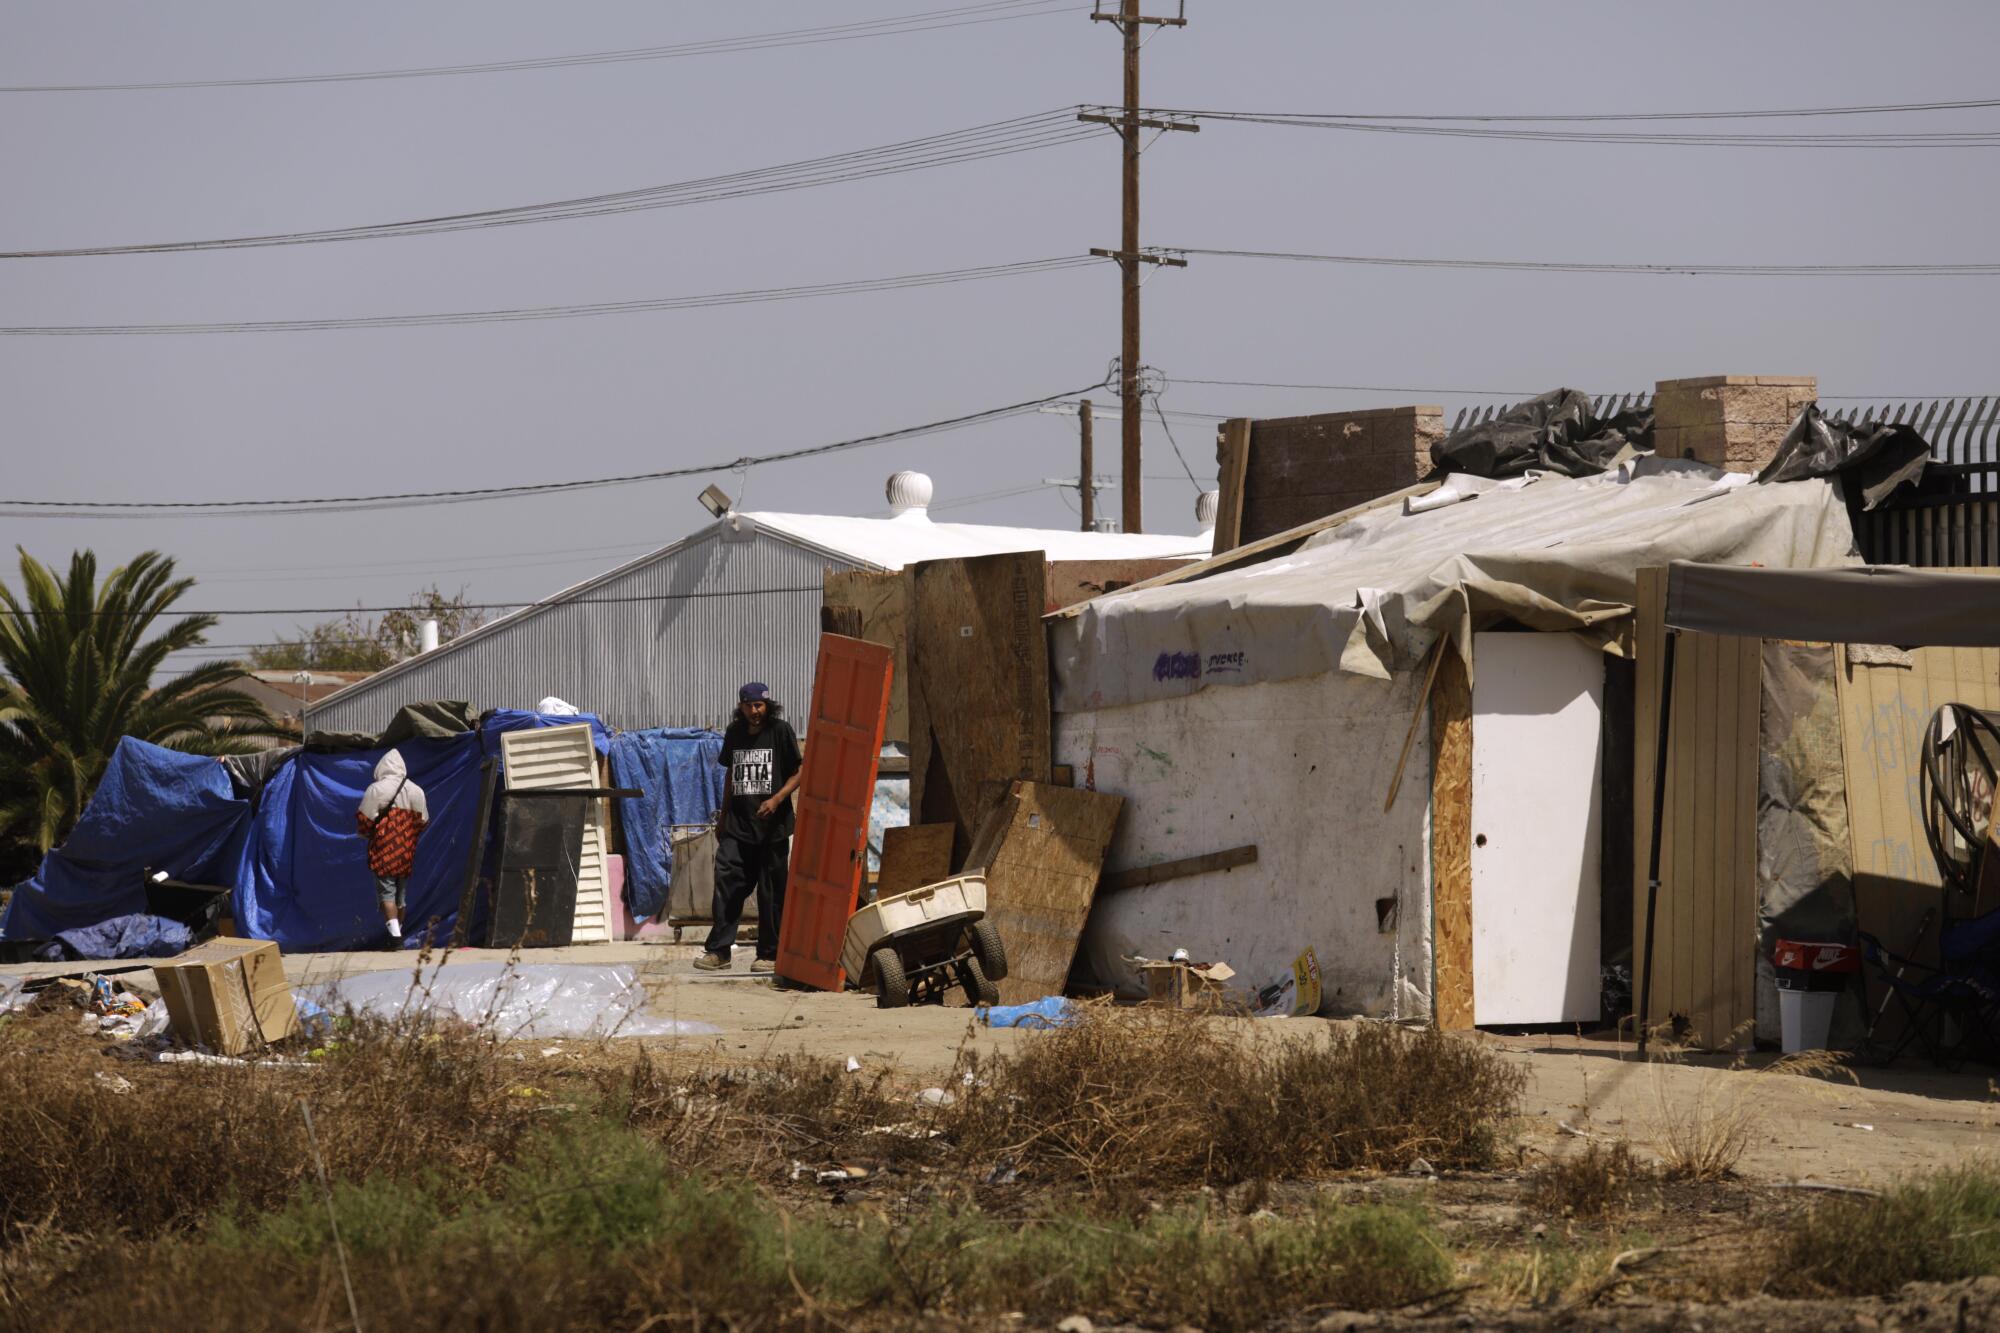 Homeless have constructed a shanty town along the periphery of a 10-acre vacant lot in Watts.